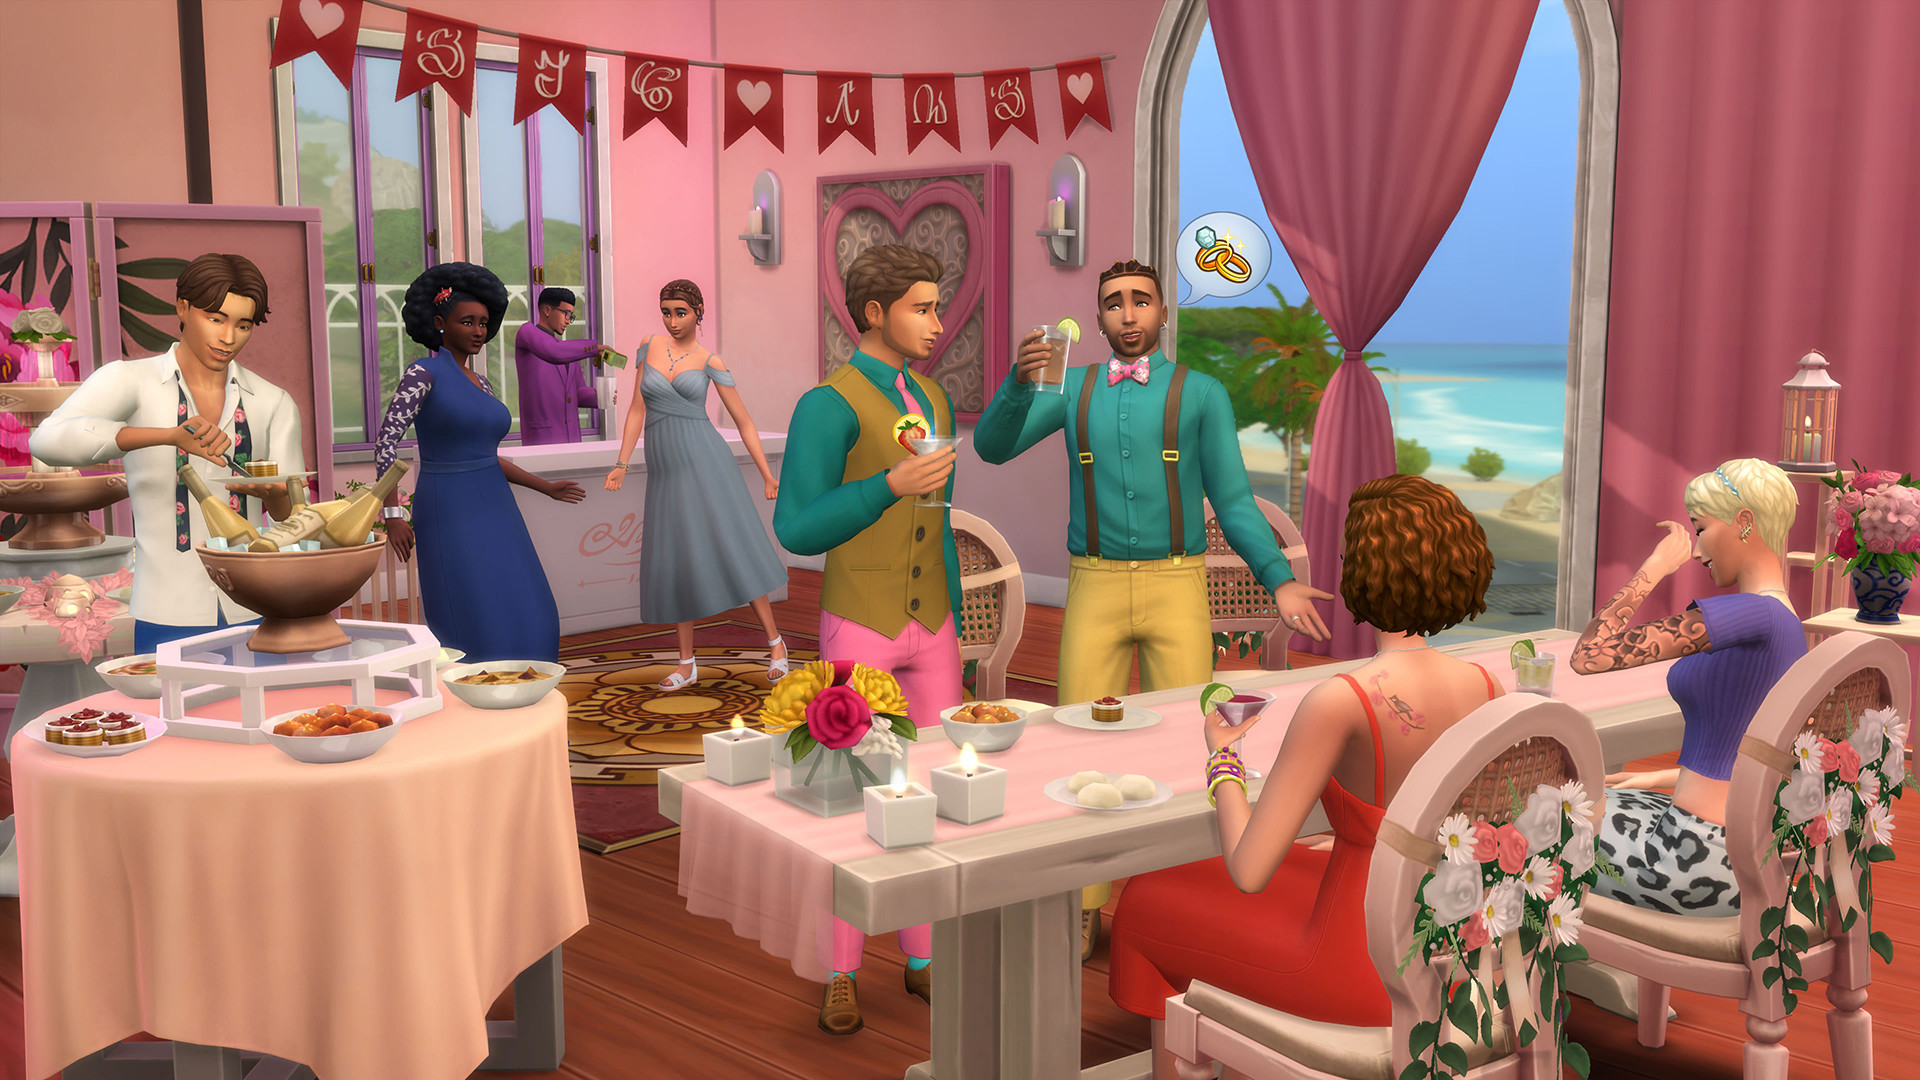 The Sims 4 - My Wedding Stories Game Pack DLC Steam Altergift, 25.82$